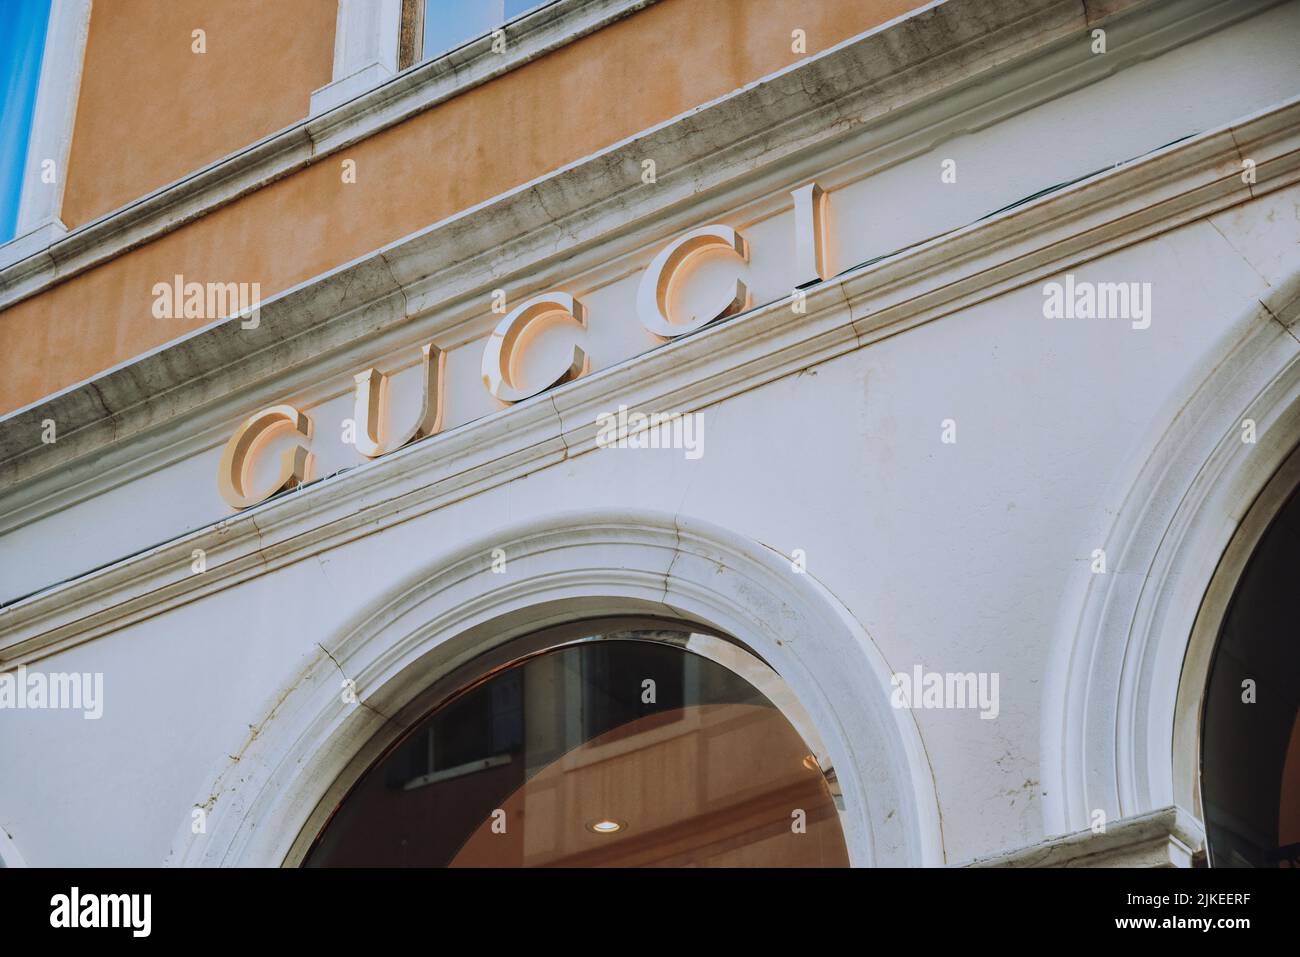 Gucci outlet hi-res stock photography and images - Alamy